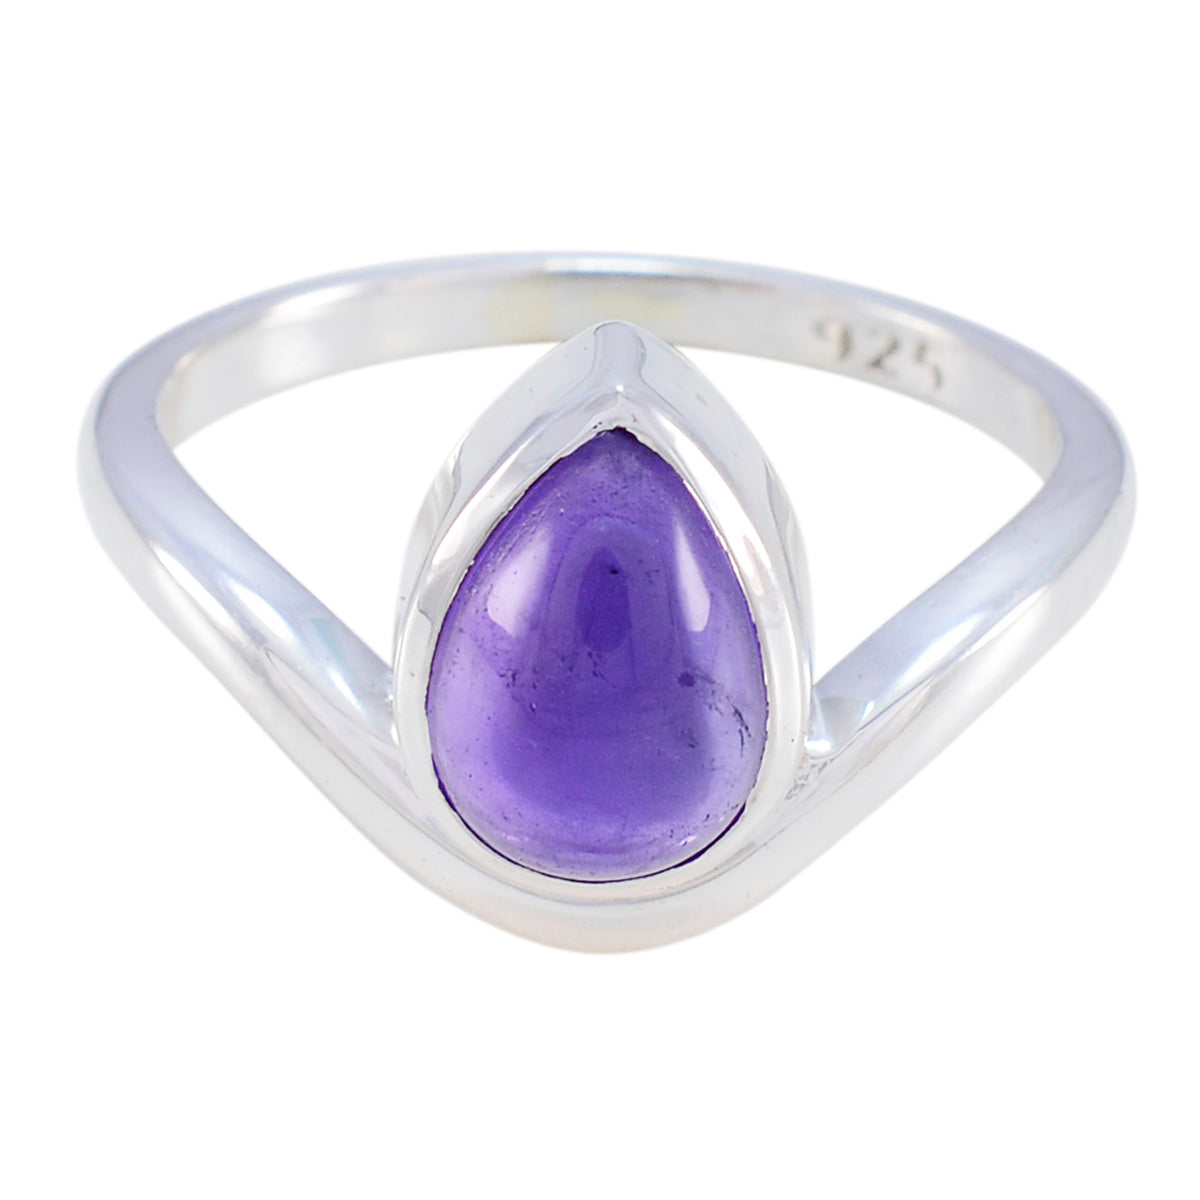 Captivating Gemstones Amethyst 925 Silver Rings Gift Independence